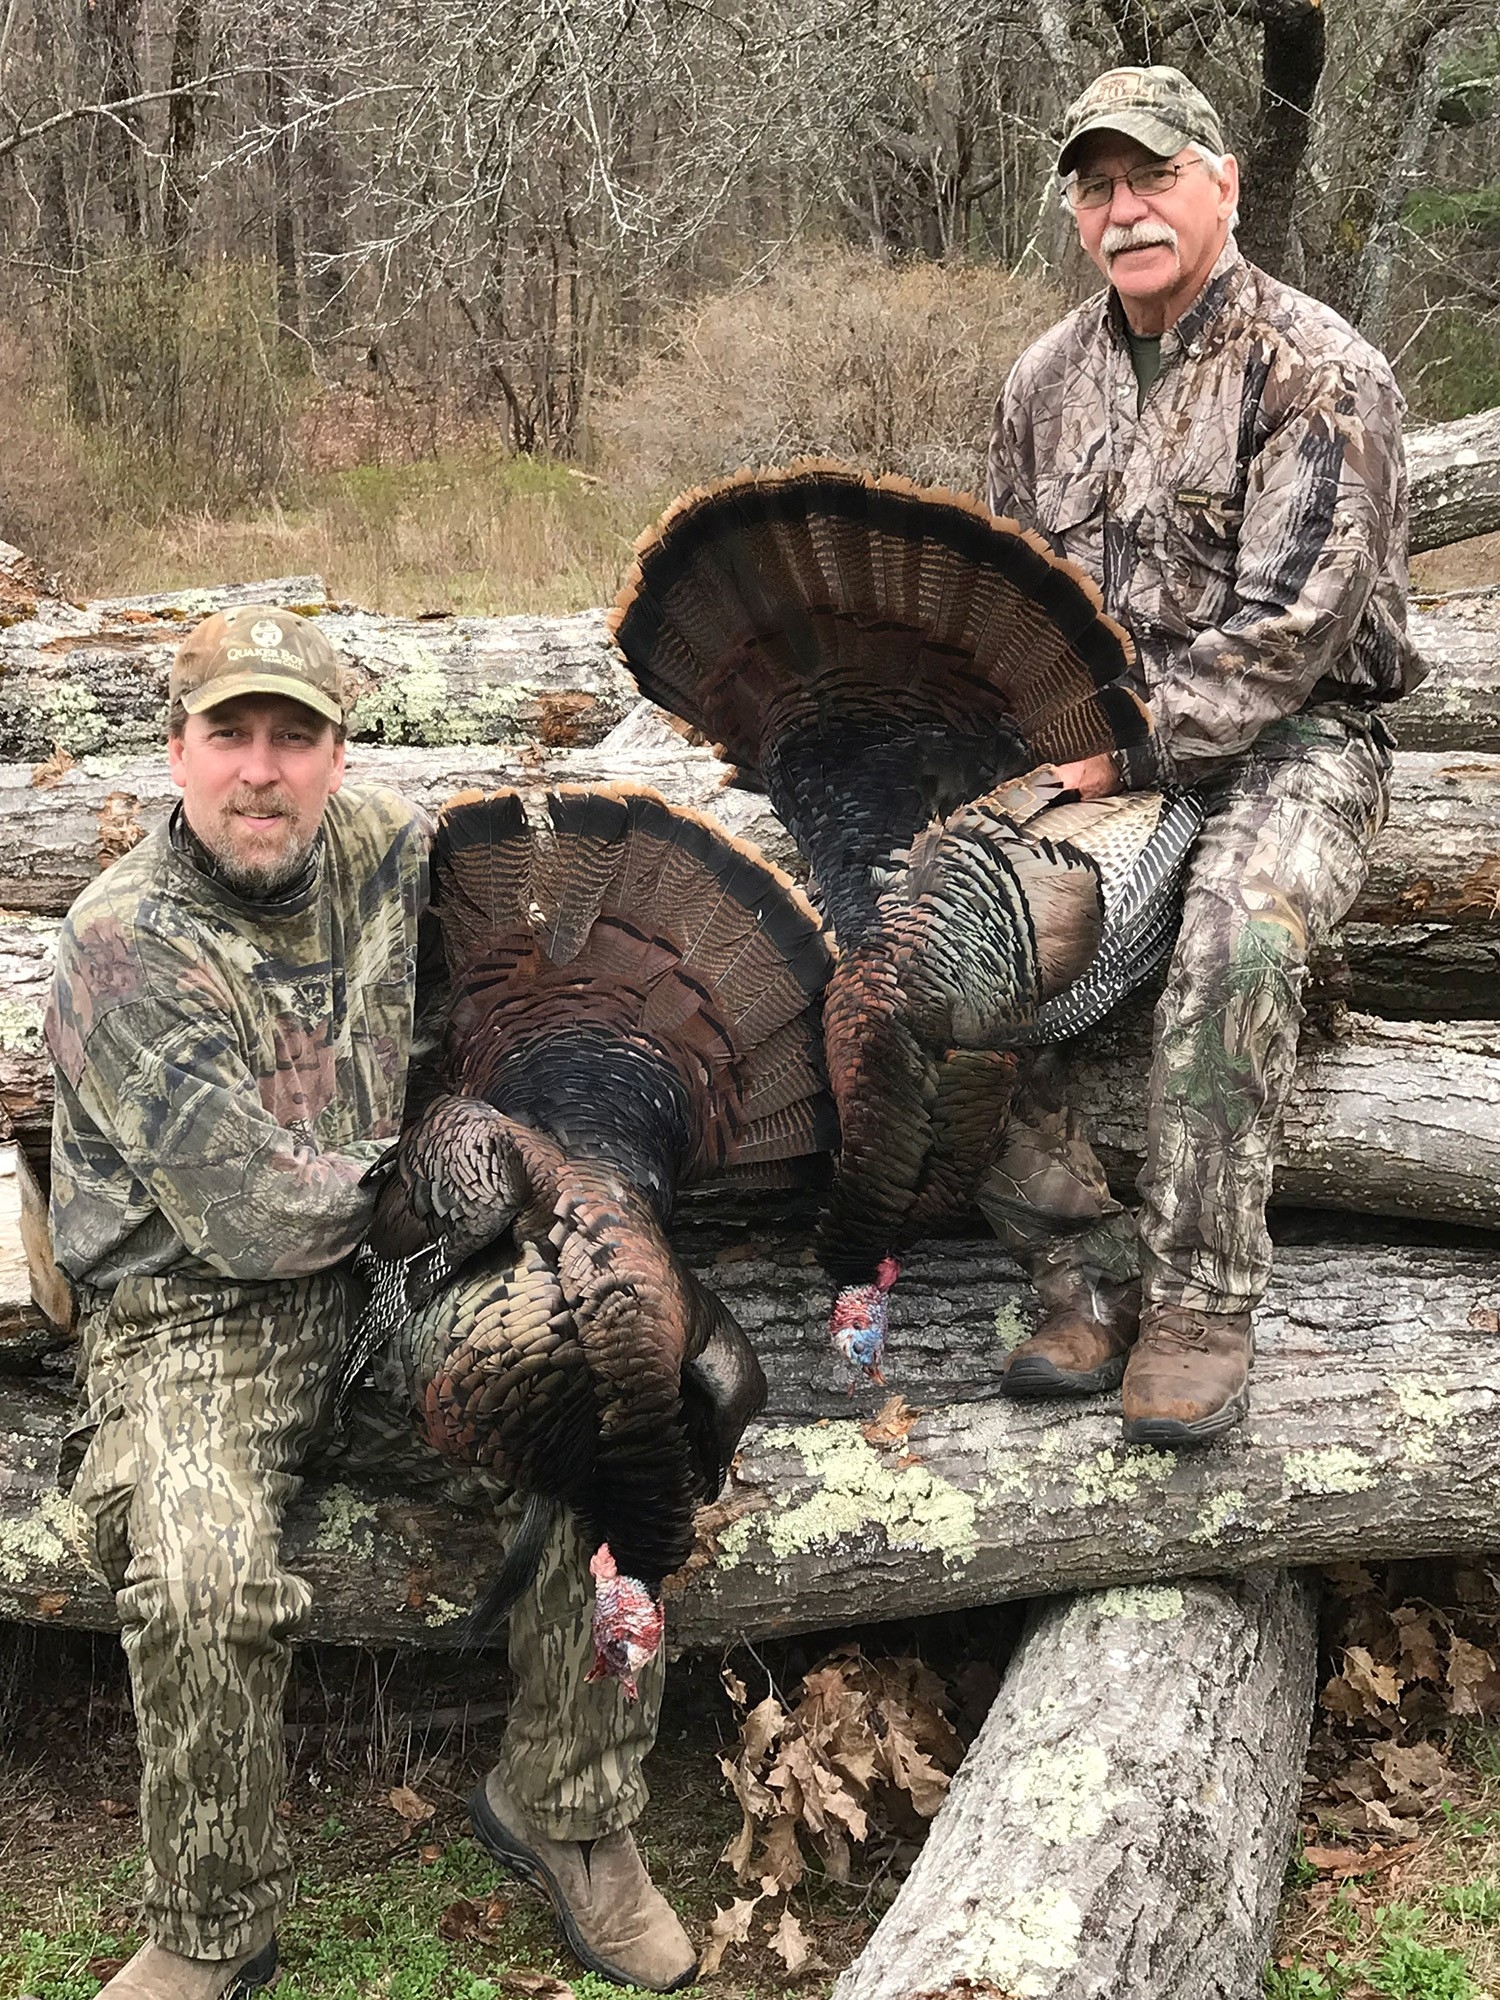 The 2020 Spring Turkey Hunting State-By-State Forecast  2021 Pa Deer Season Forecast